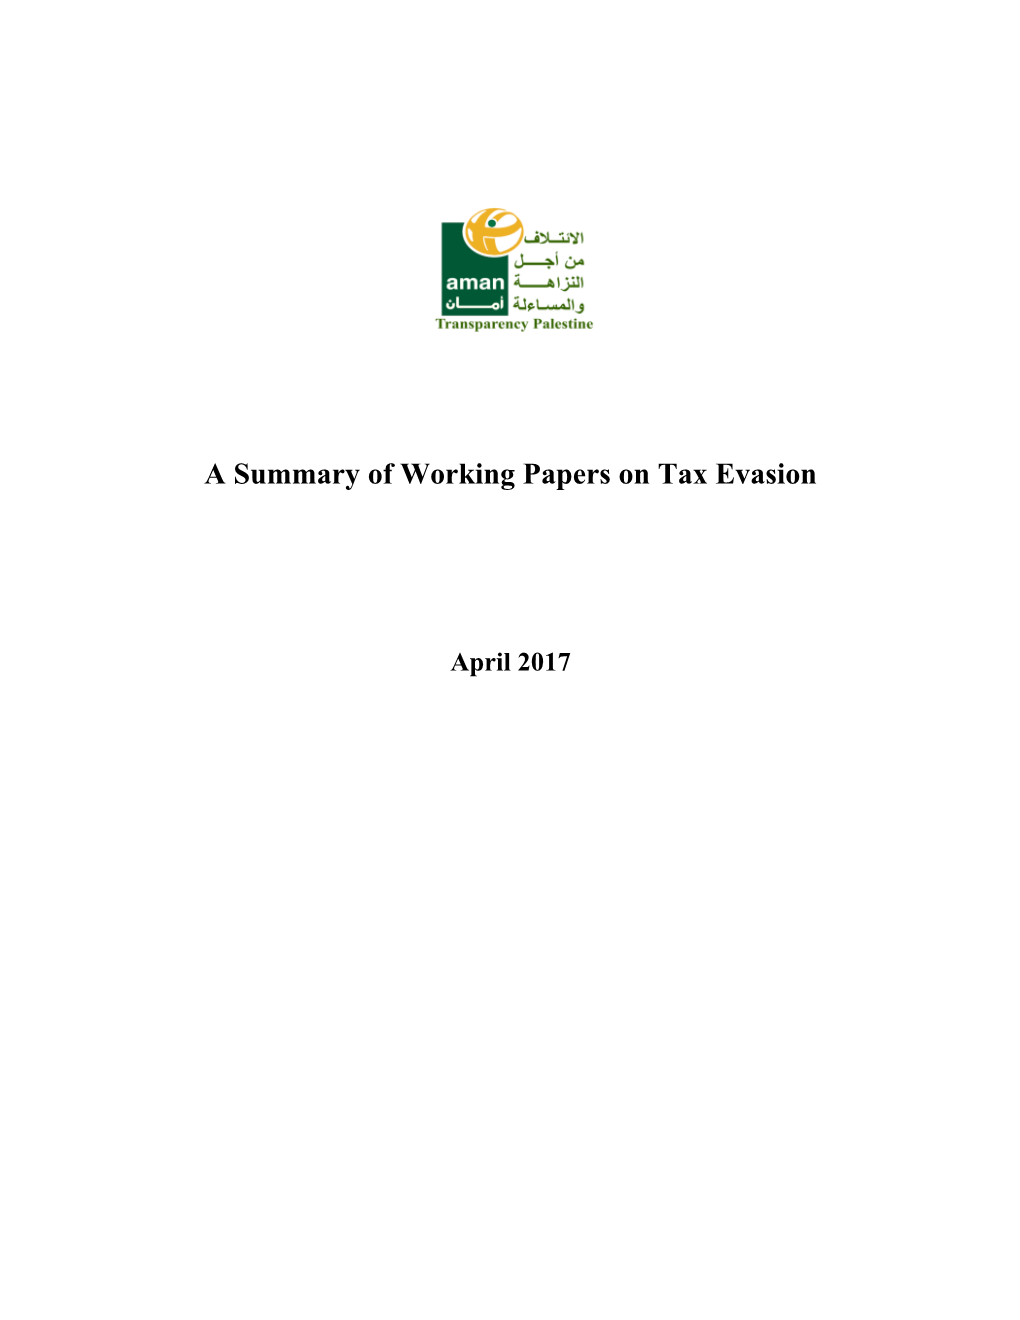 A Summary of Working Papers on Tax Evasion